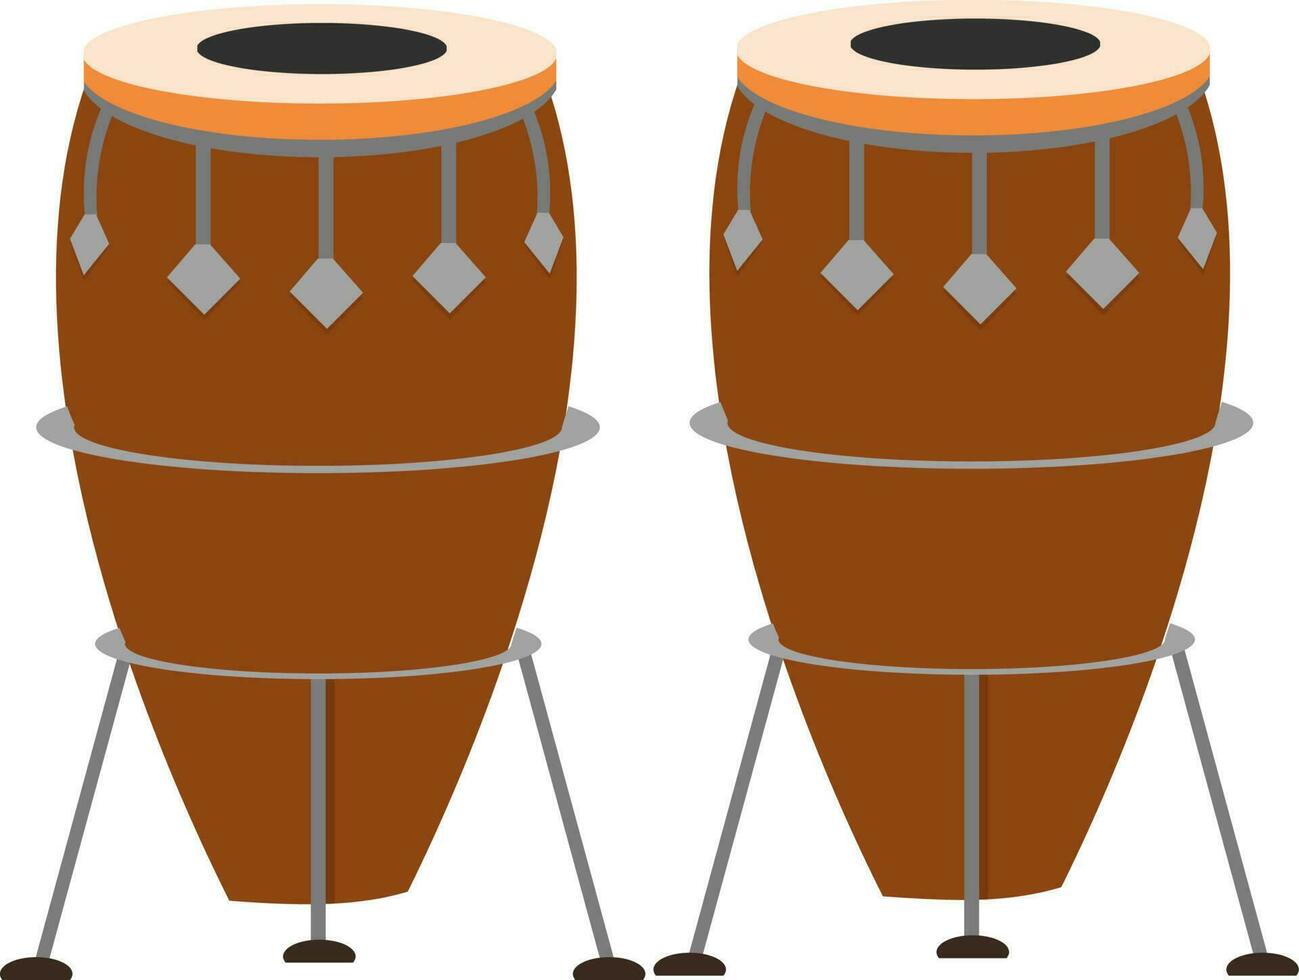 Illustration of conga drums. vector